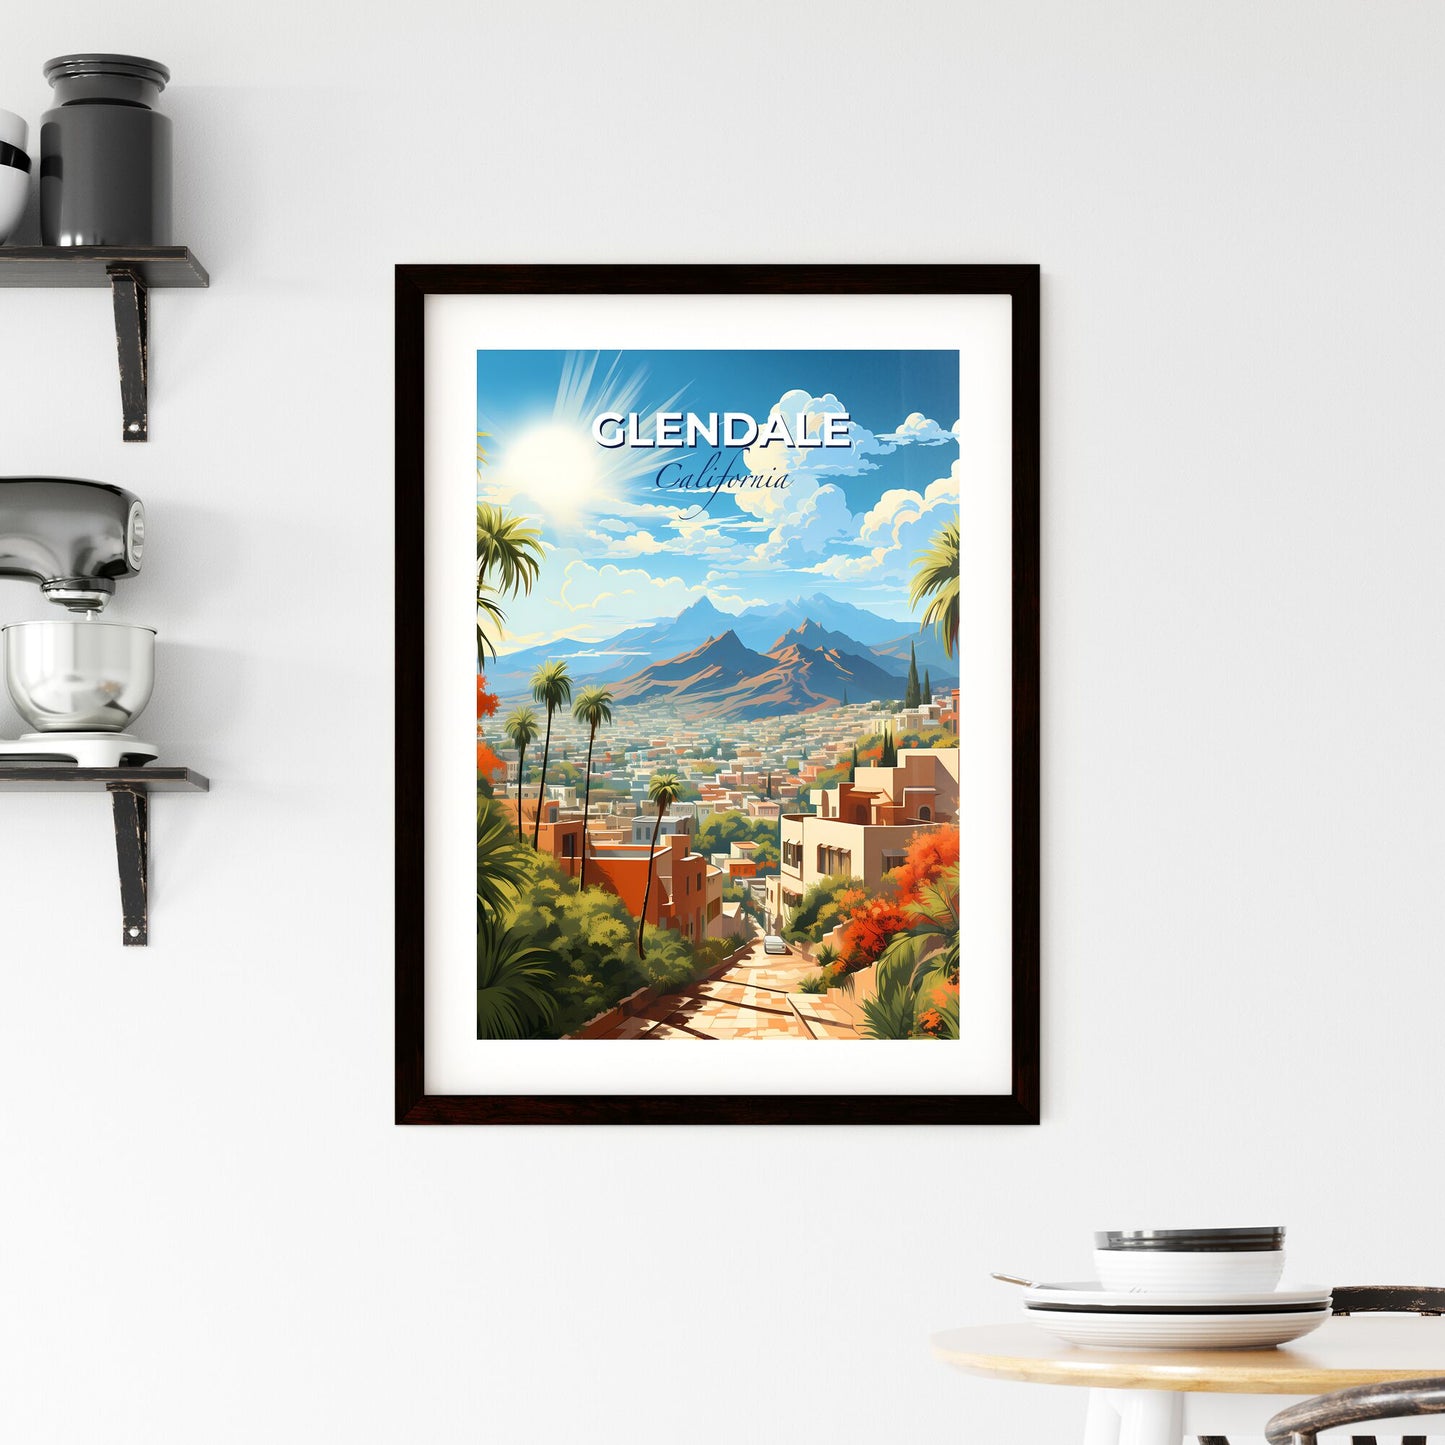 Glendale, California, A Poster of a city with palm trees and mountains in the background Default Title